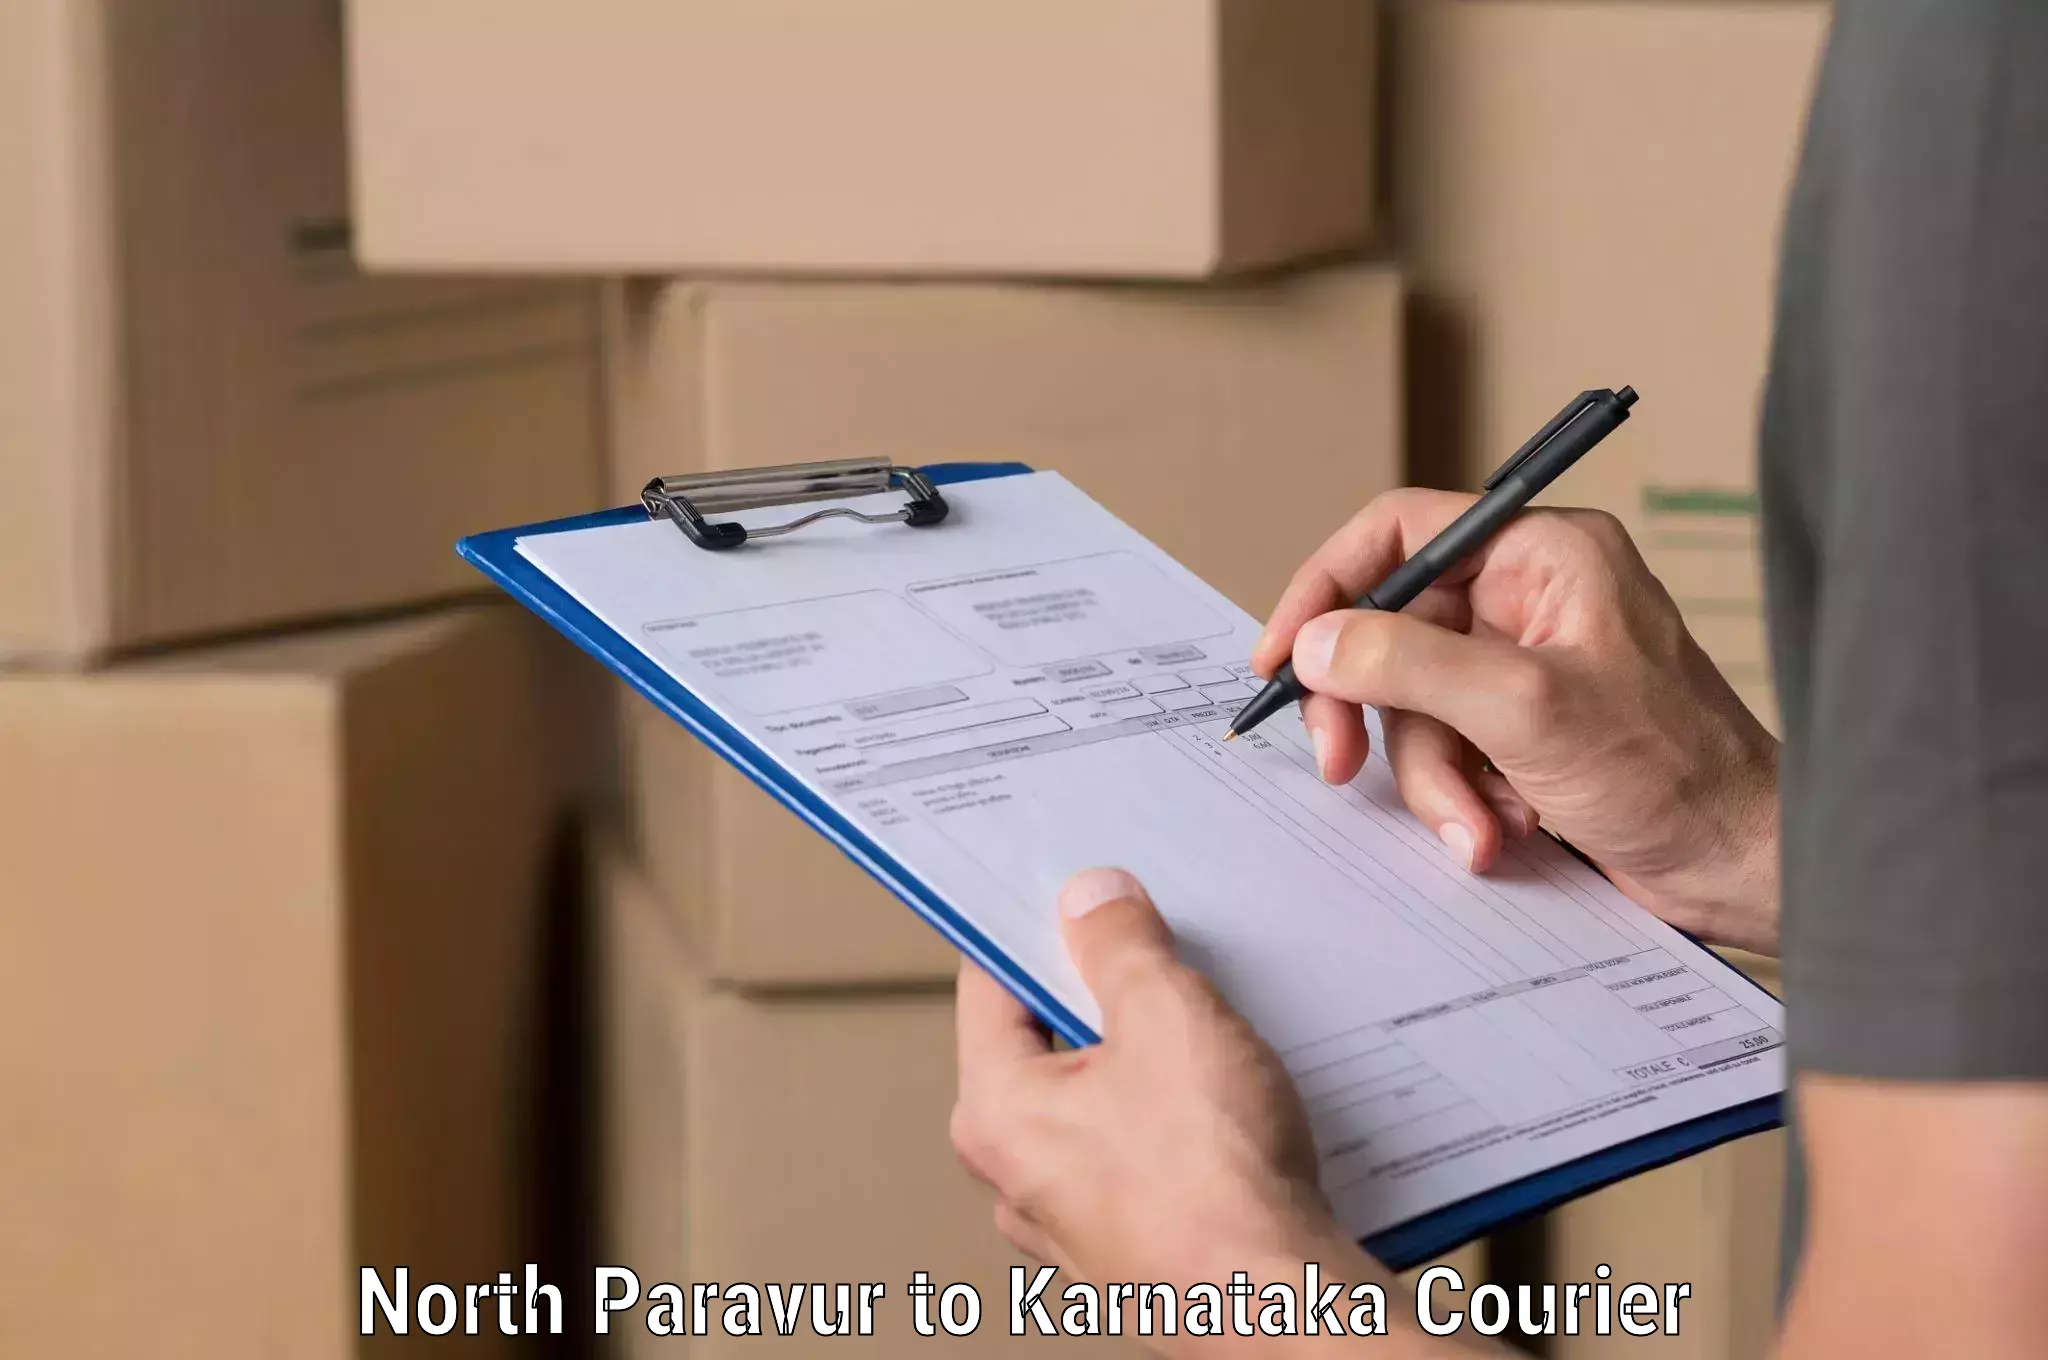 Secure package delivery in North Paravur to Yenepoya Mangalore